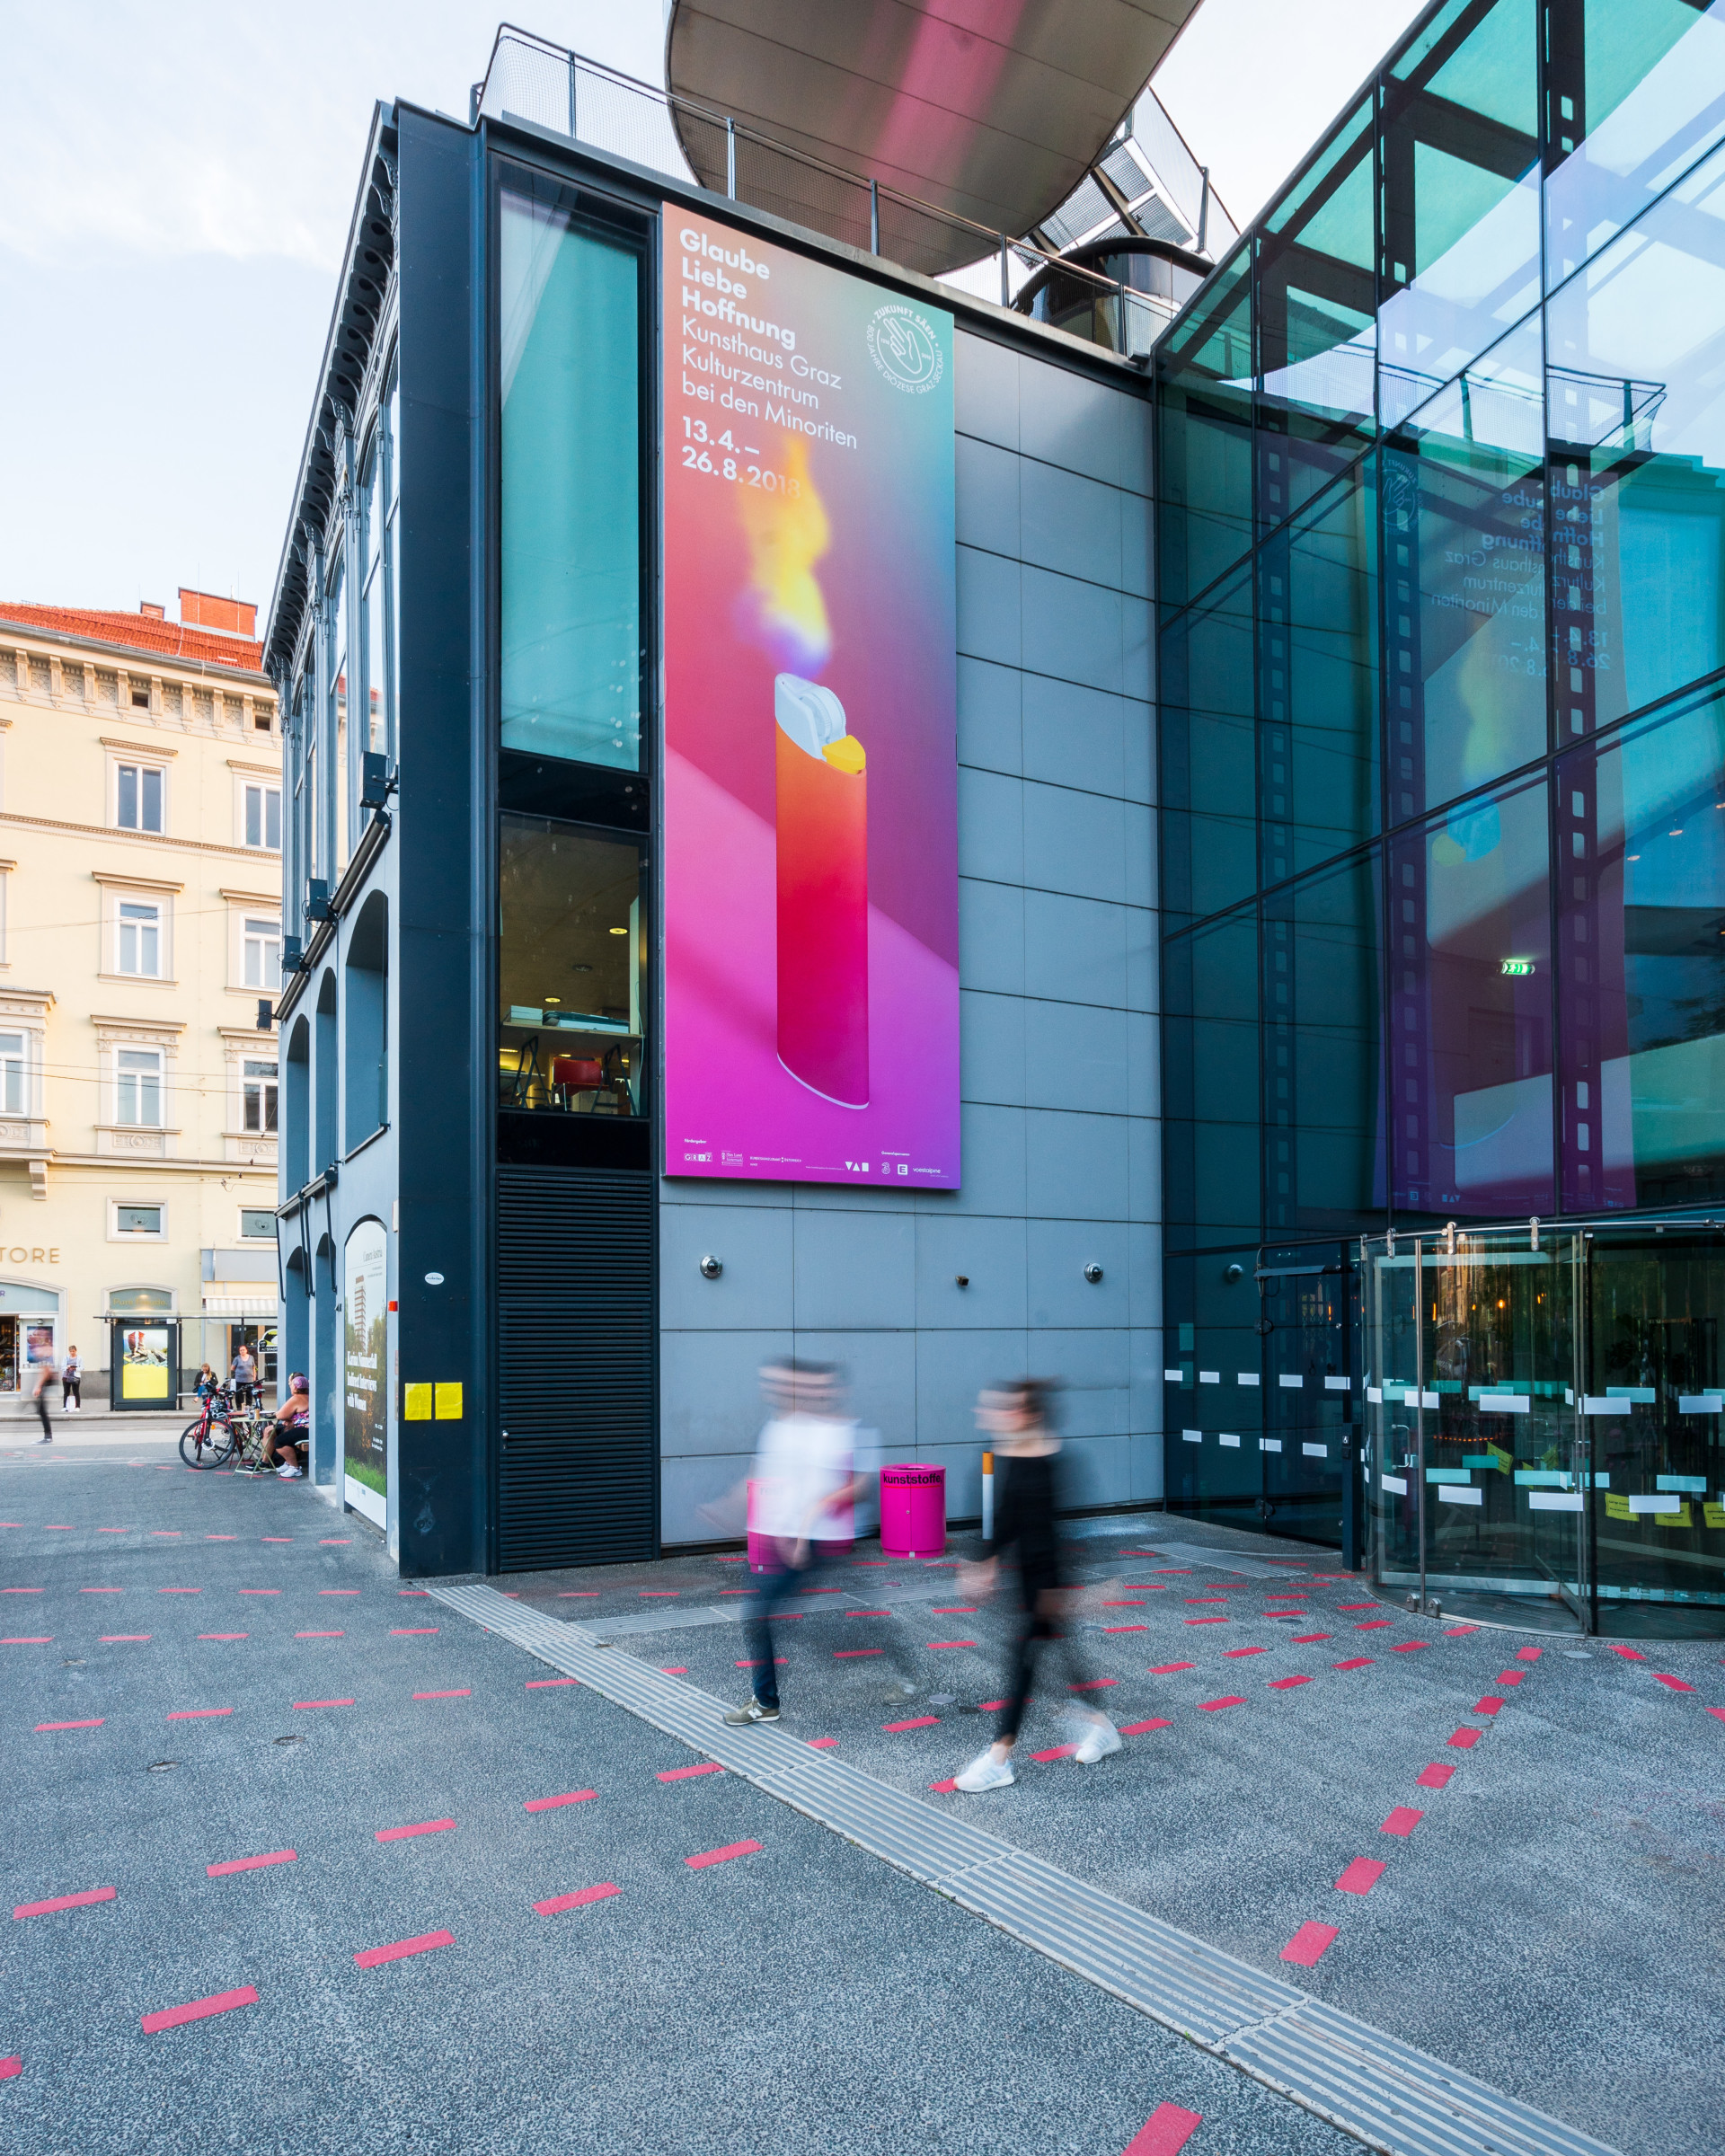 The Kunsthaus from the outside with large exhibition poster hanging from the facade